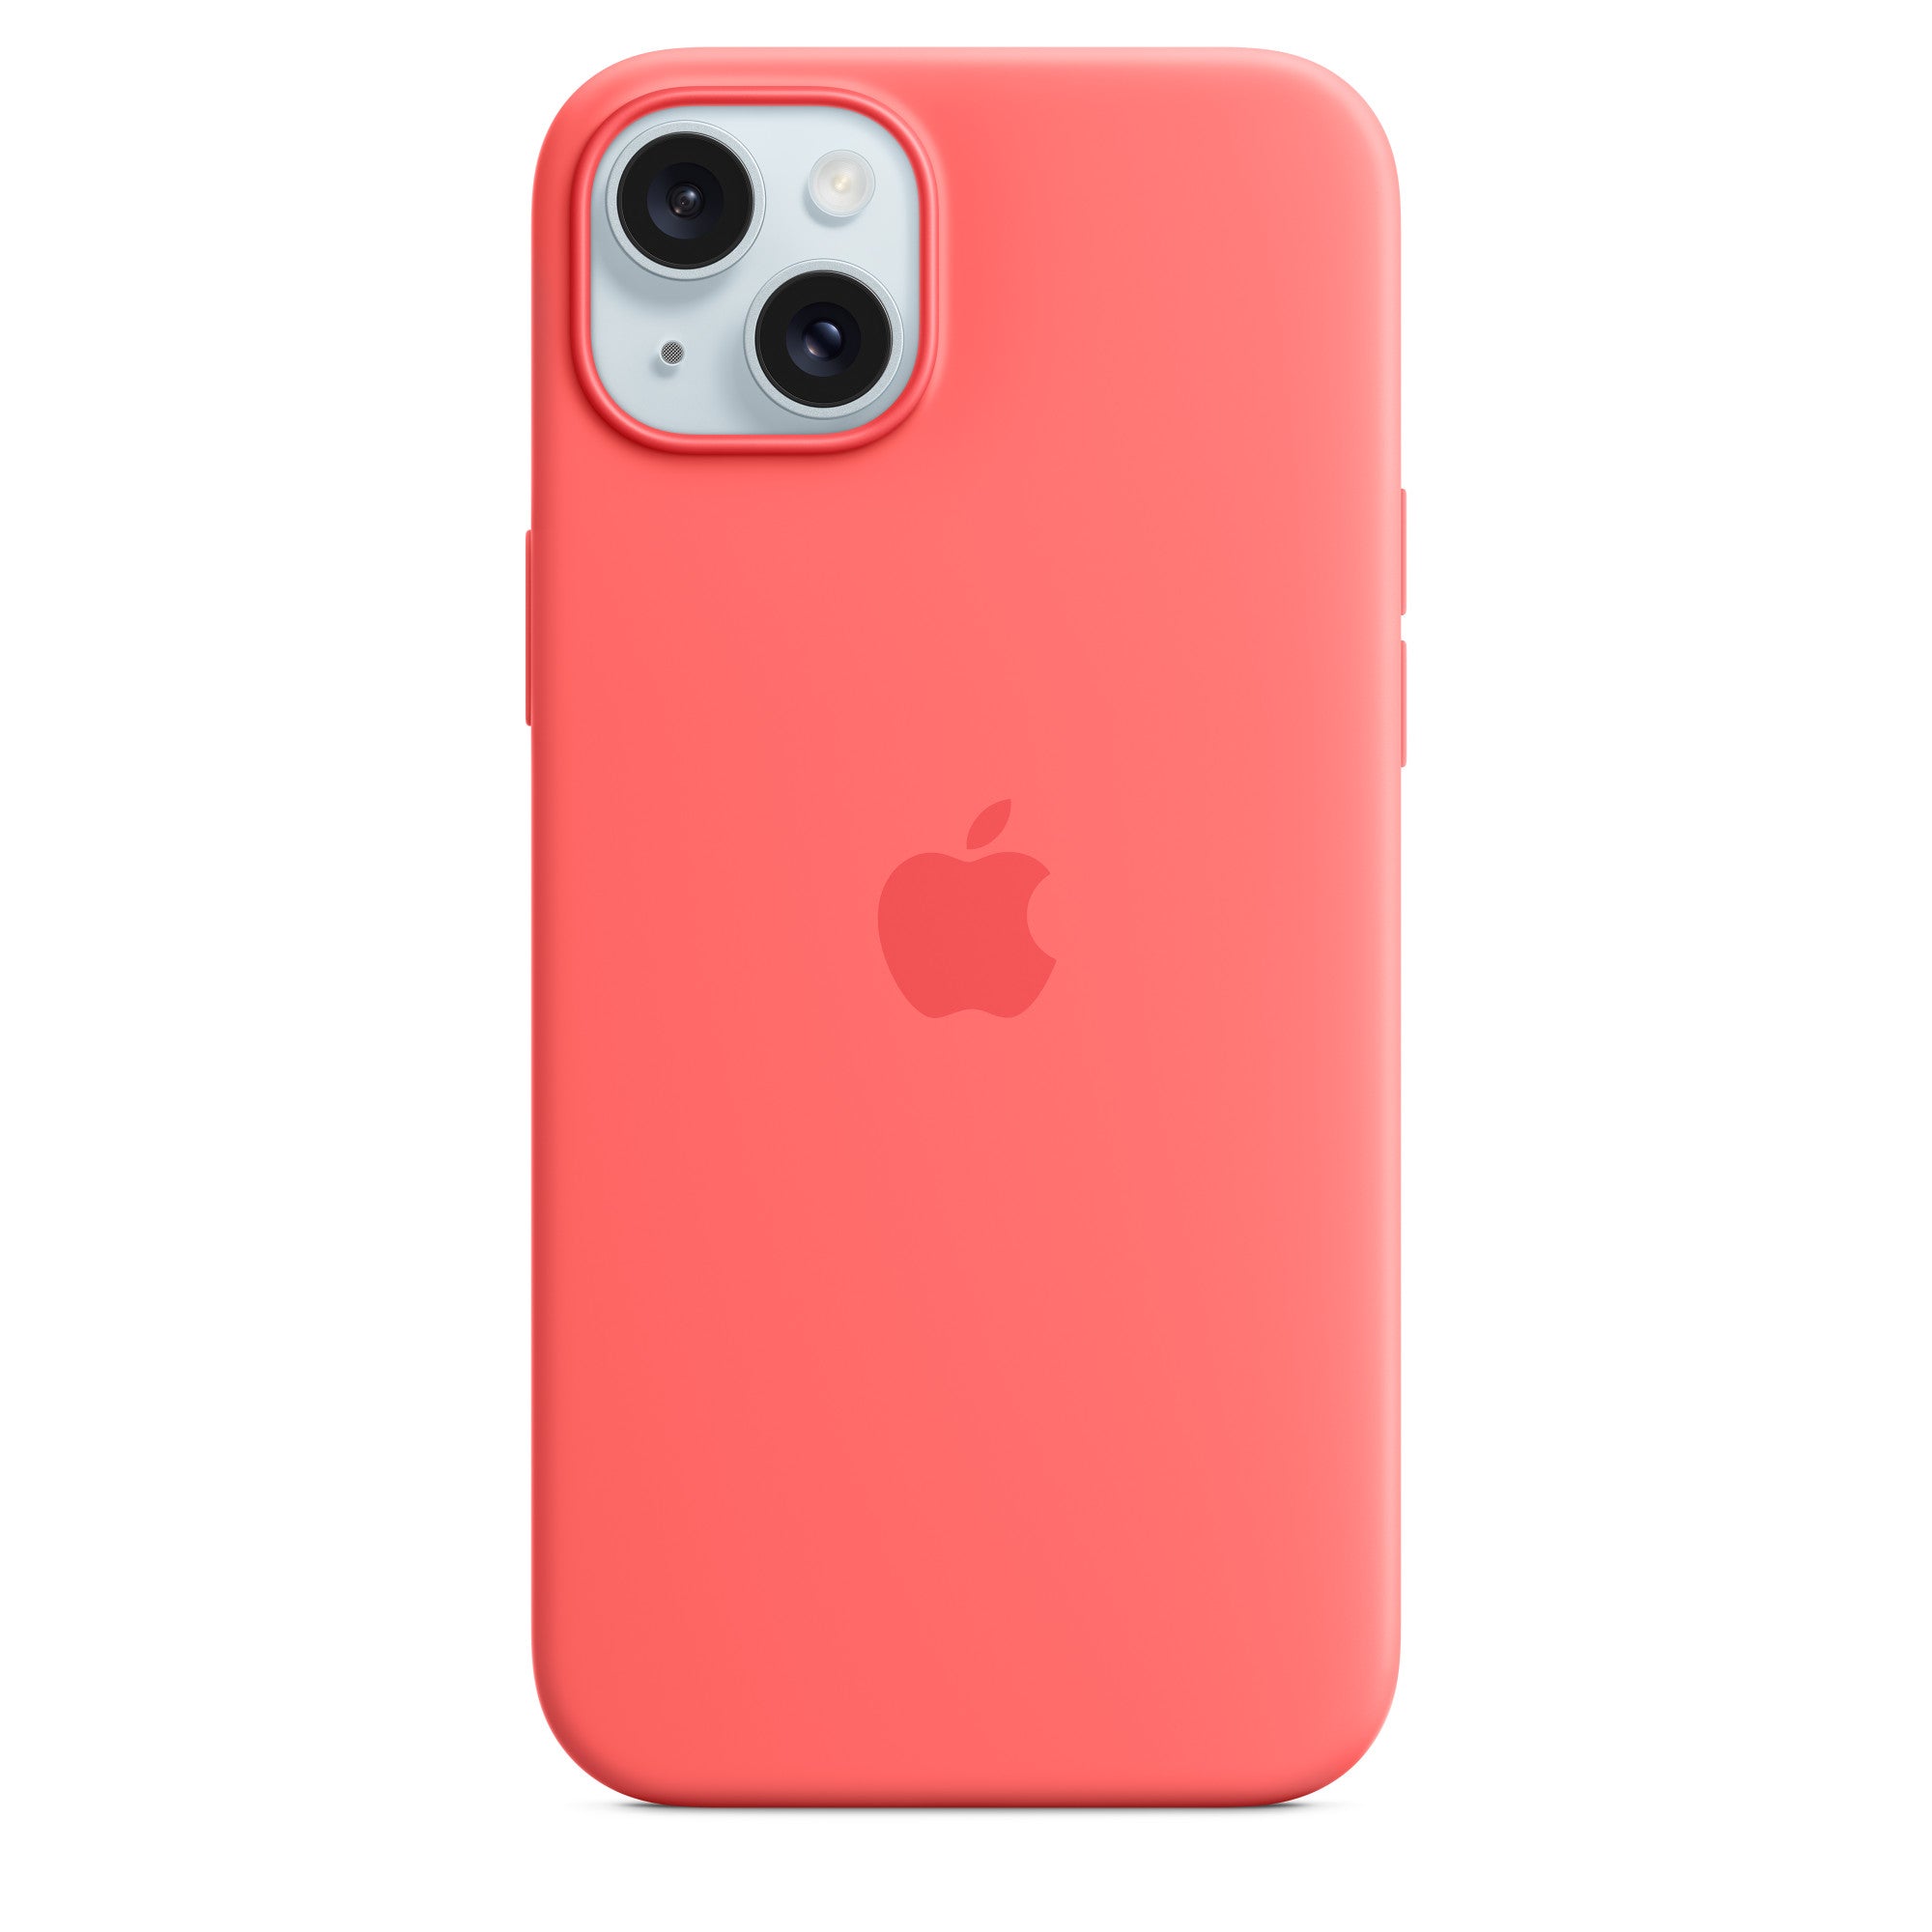 iPhone 13 / 14 Silicone Case with Wireless Charging Support